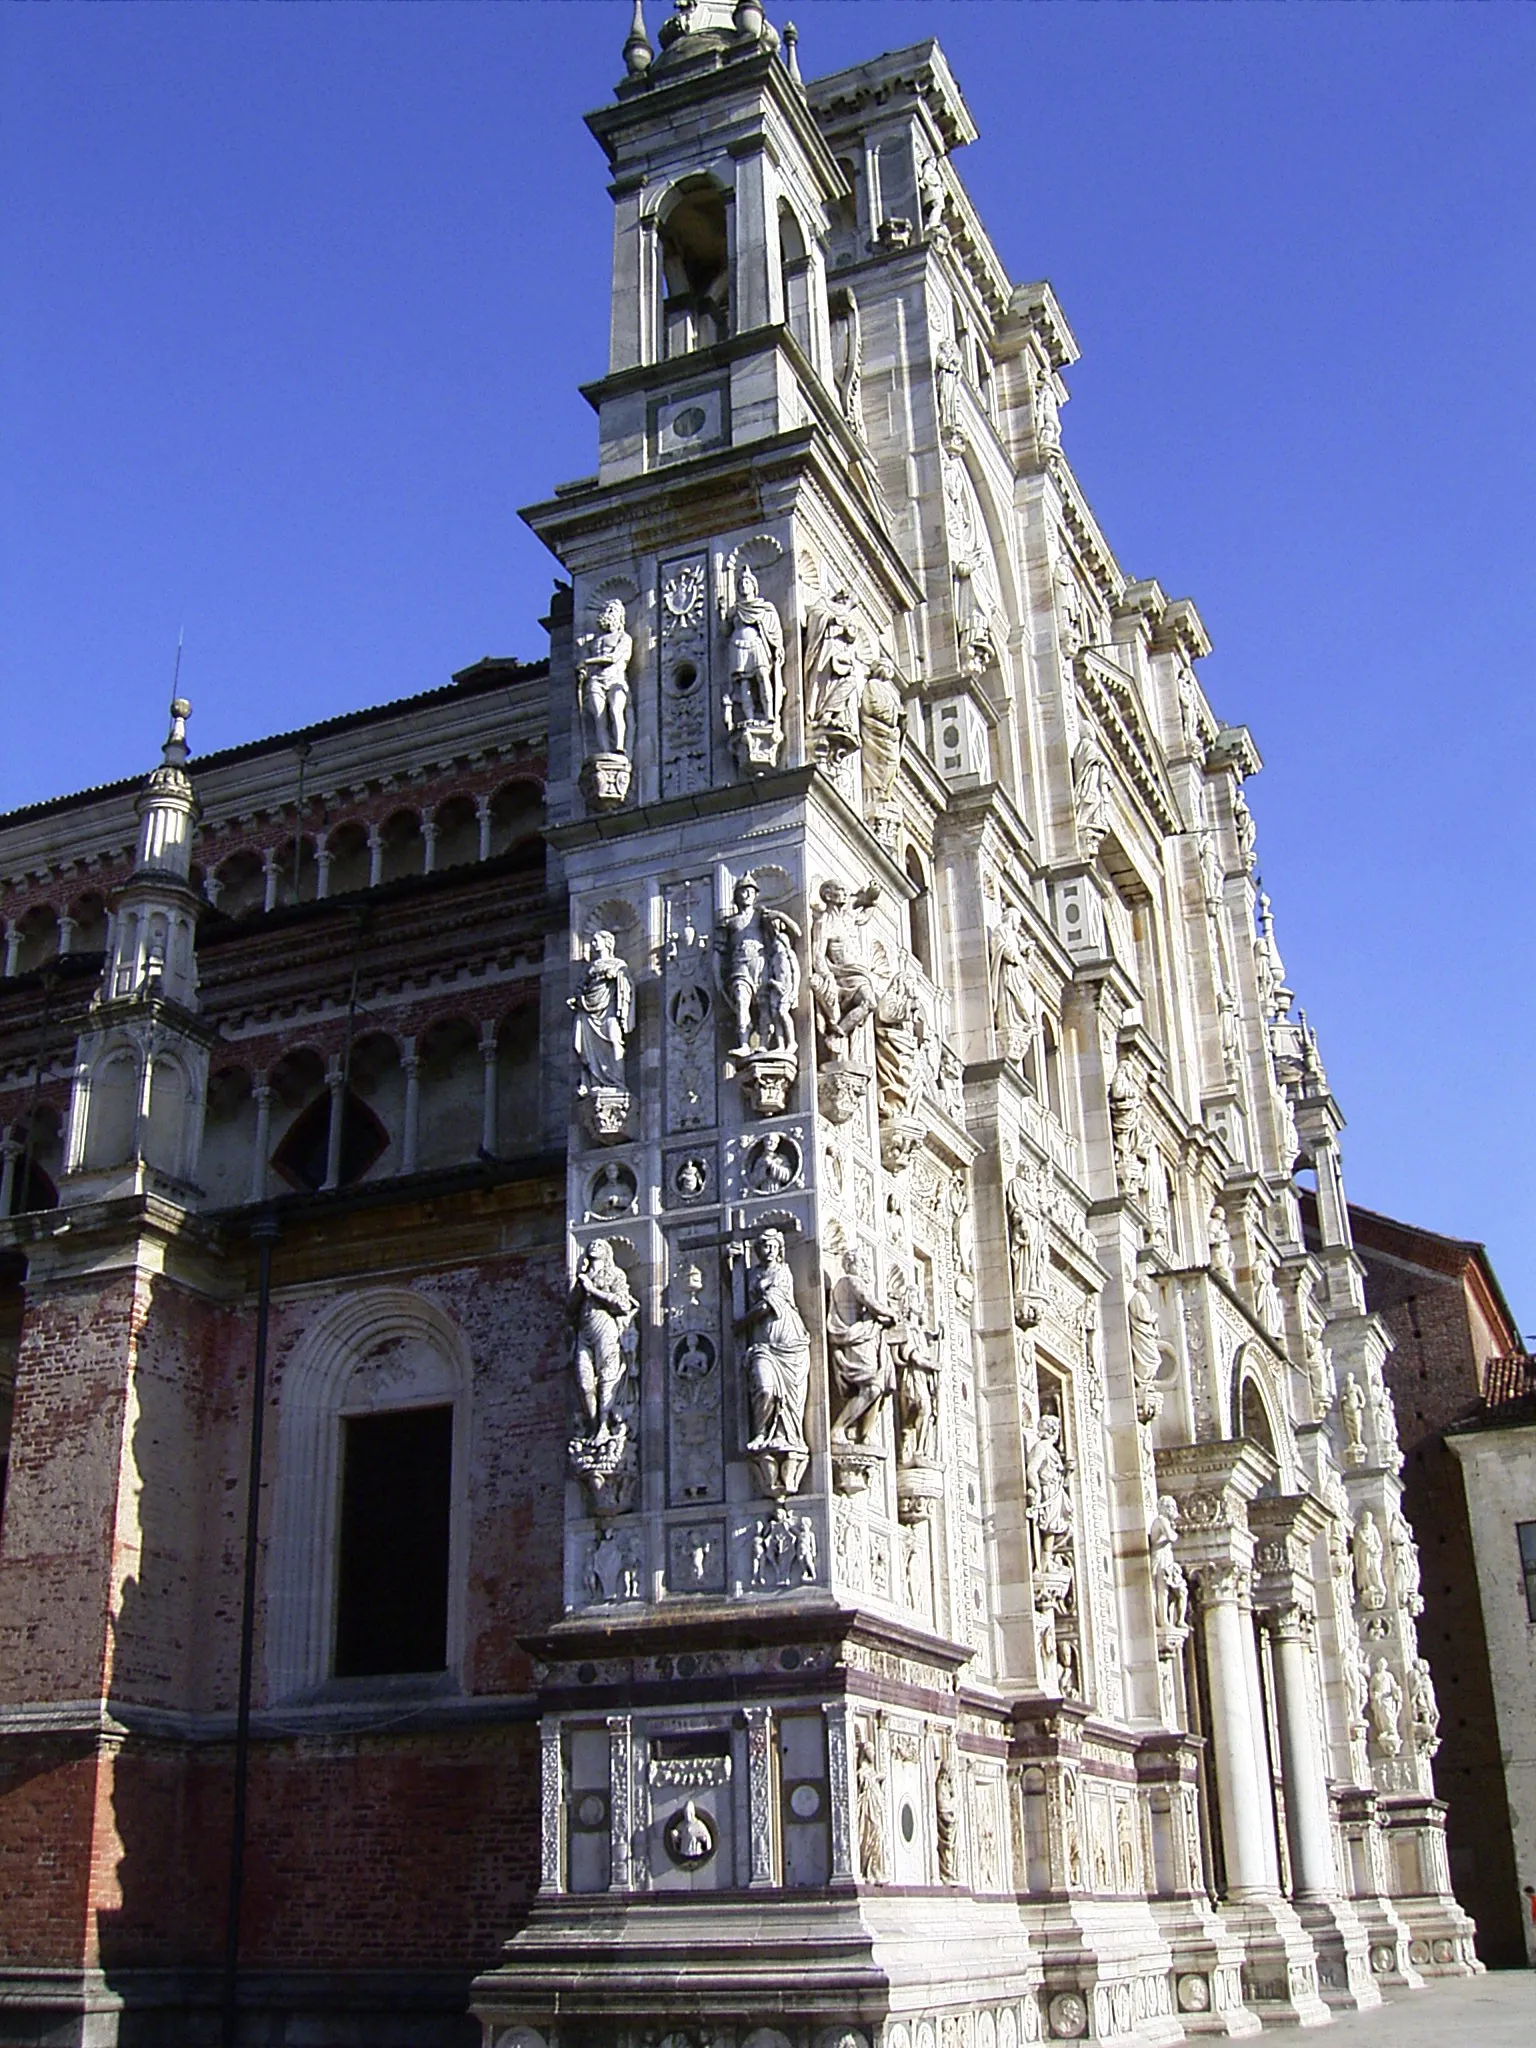 Photo showing: A lateral view of the church of the monastery of Certosa di Pavia, near Pavia, Italy.